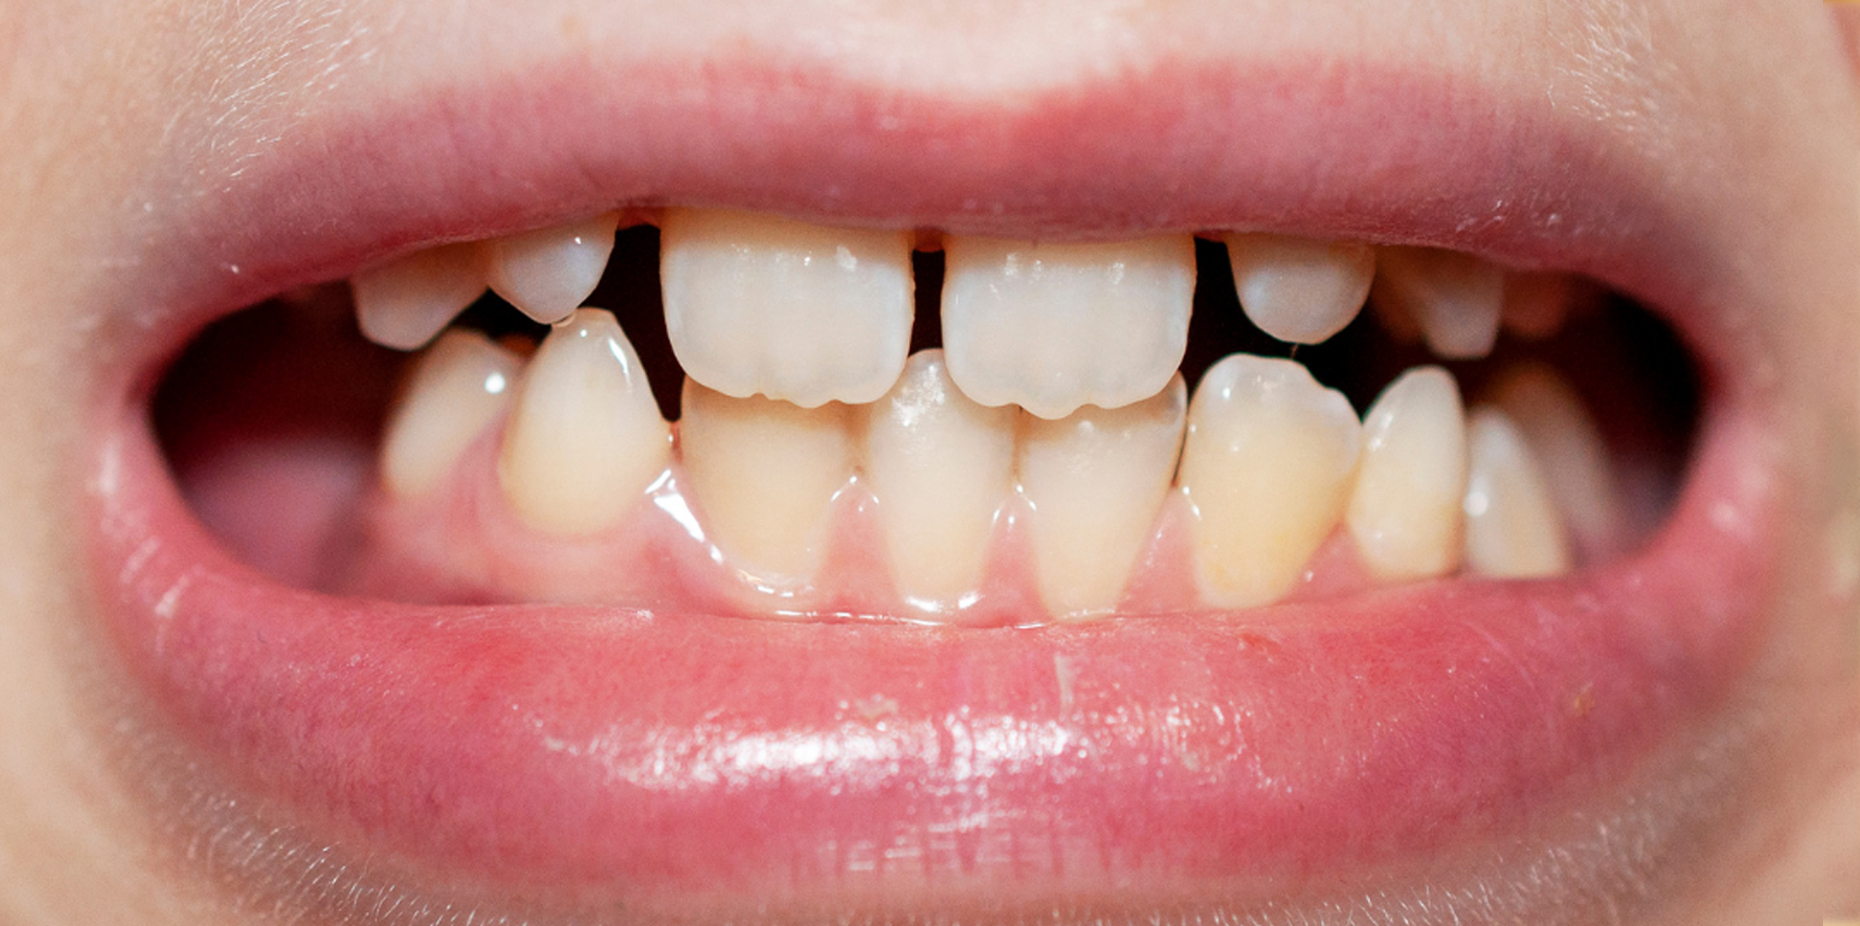 Malocclusion of Teeth: Classification, Causes, Treatment, and More